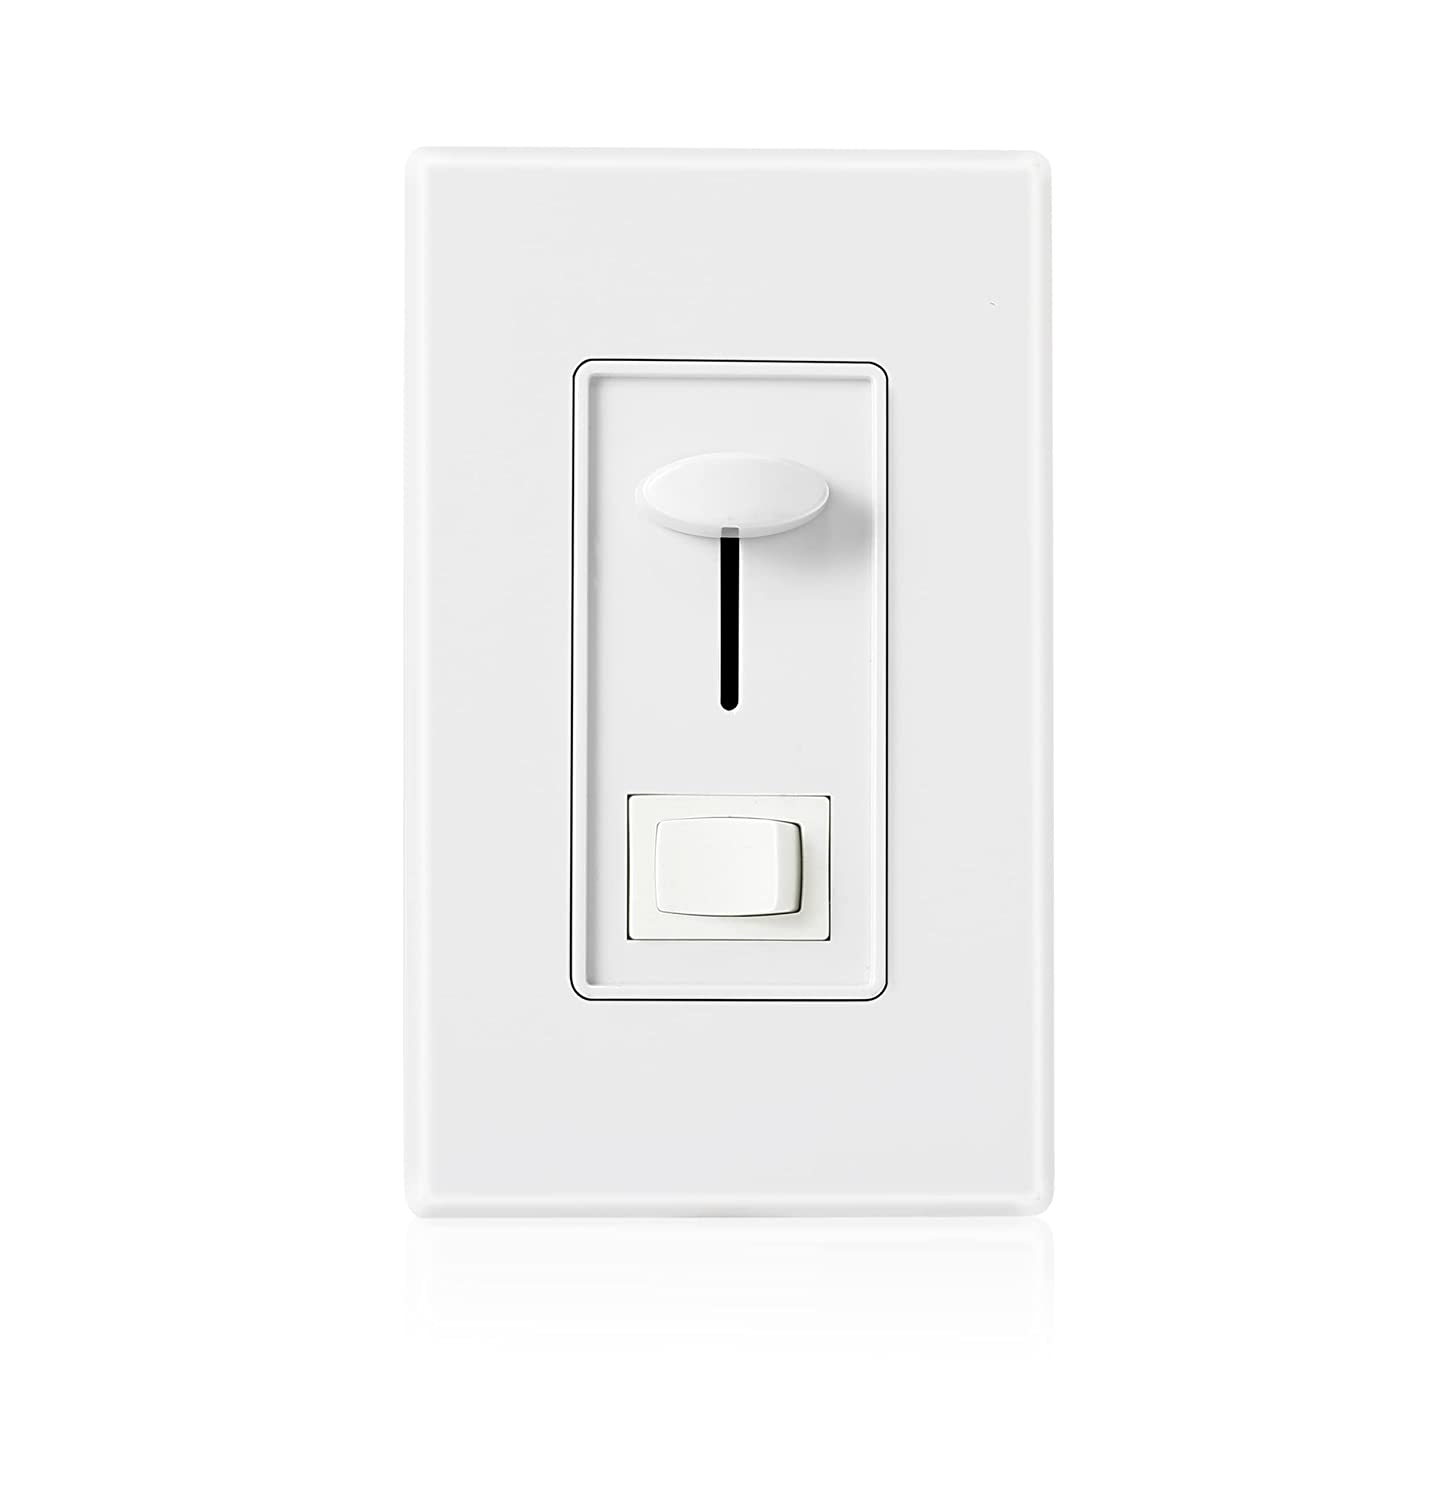 In Wall Dimmer Switch for LED Light/CFL/Incandescent,3-Way Single Pole Dimmable Slide,600 Watt max,Cover Plate Included,White